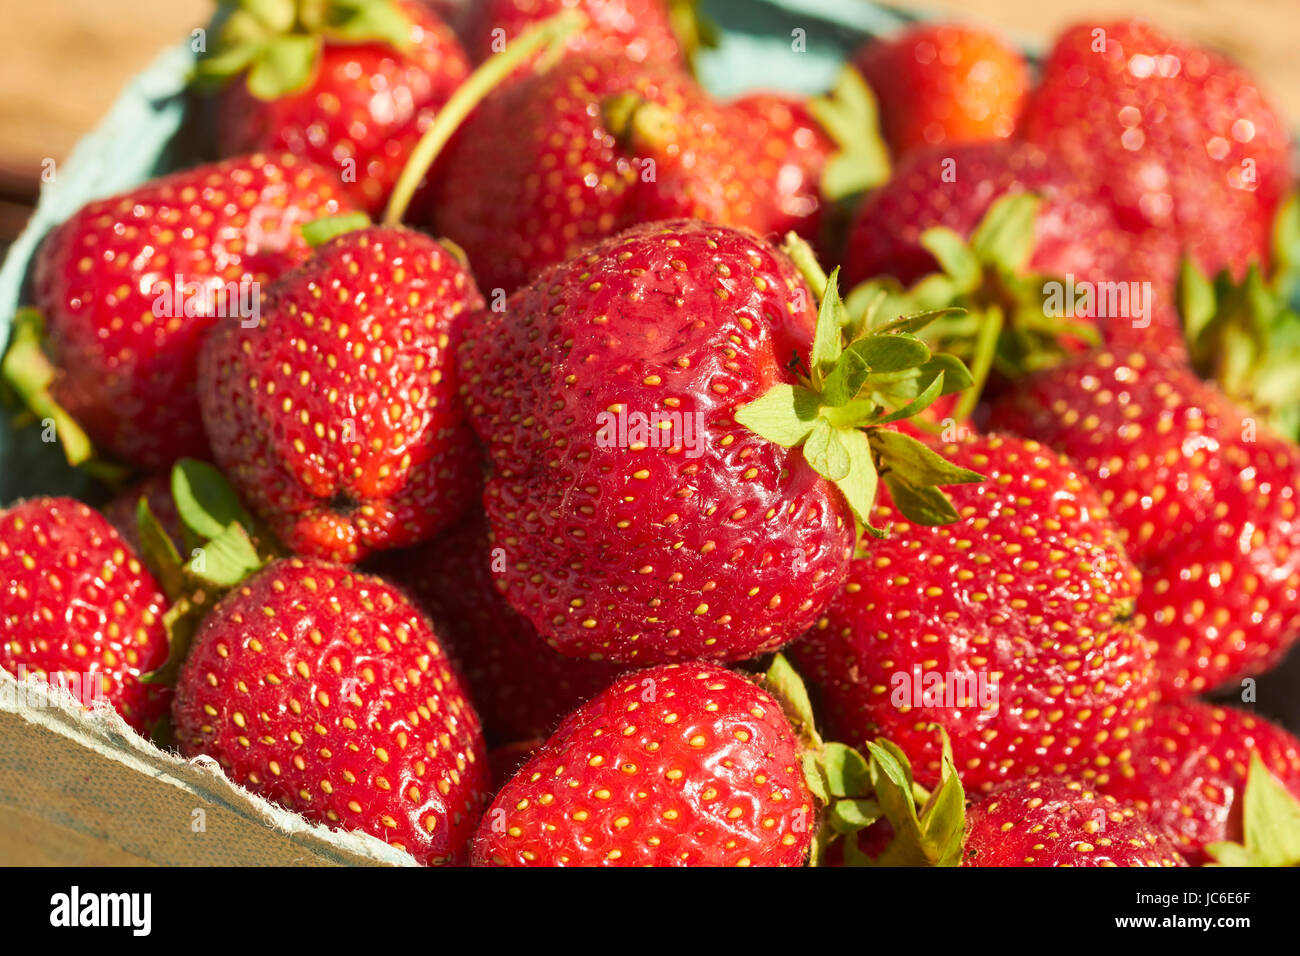 a quart of freshly picked strawberries out in the sunshine Stock Photo